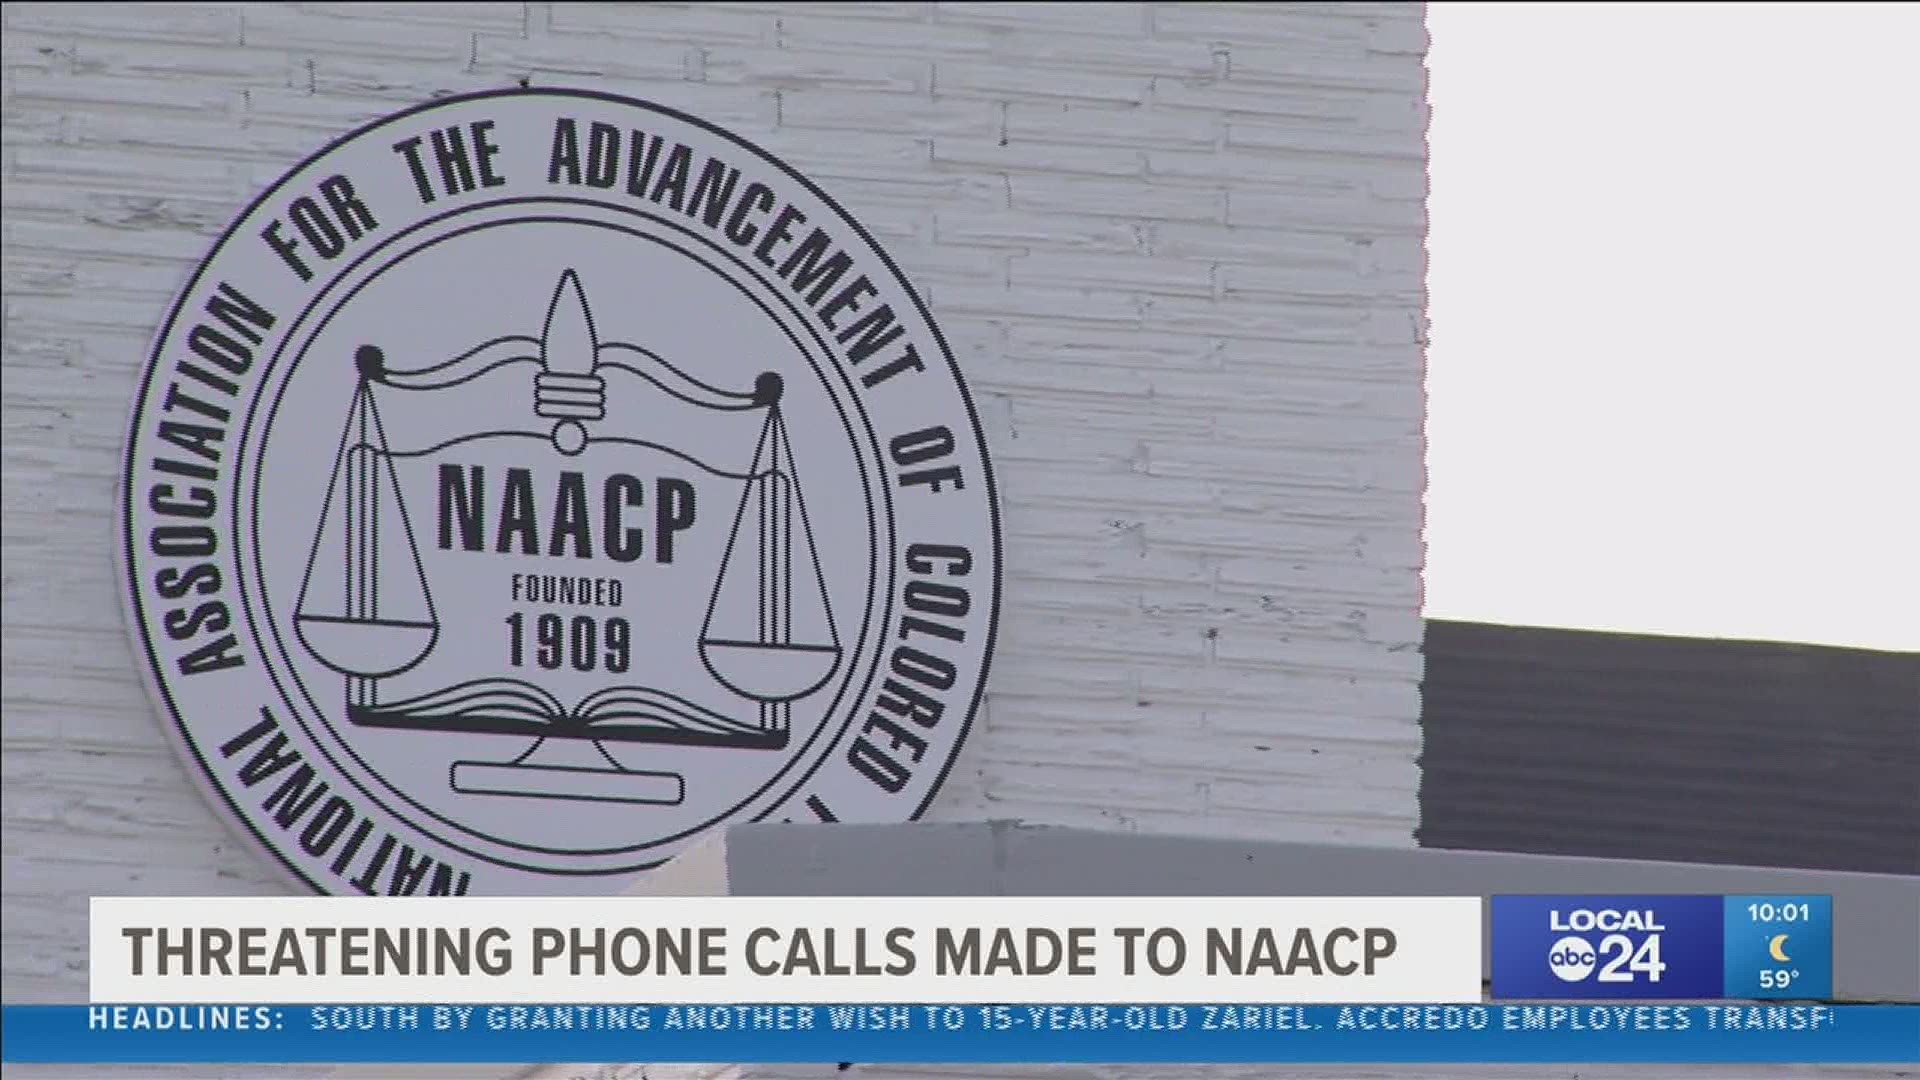 The Memphis Chapter of the NAACP said they received threating calls containing racial slurs.